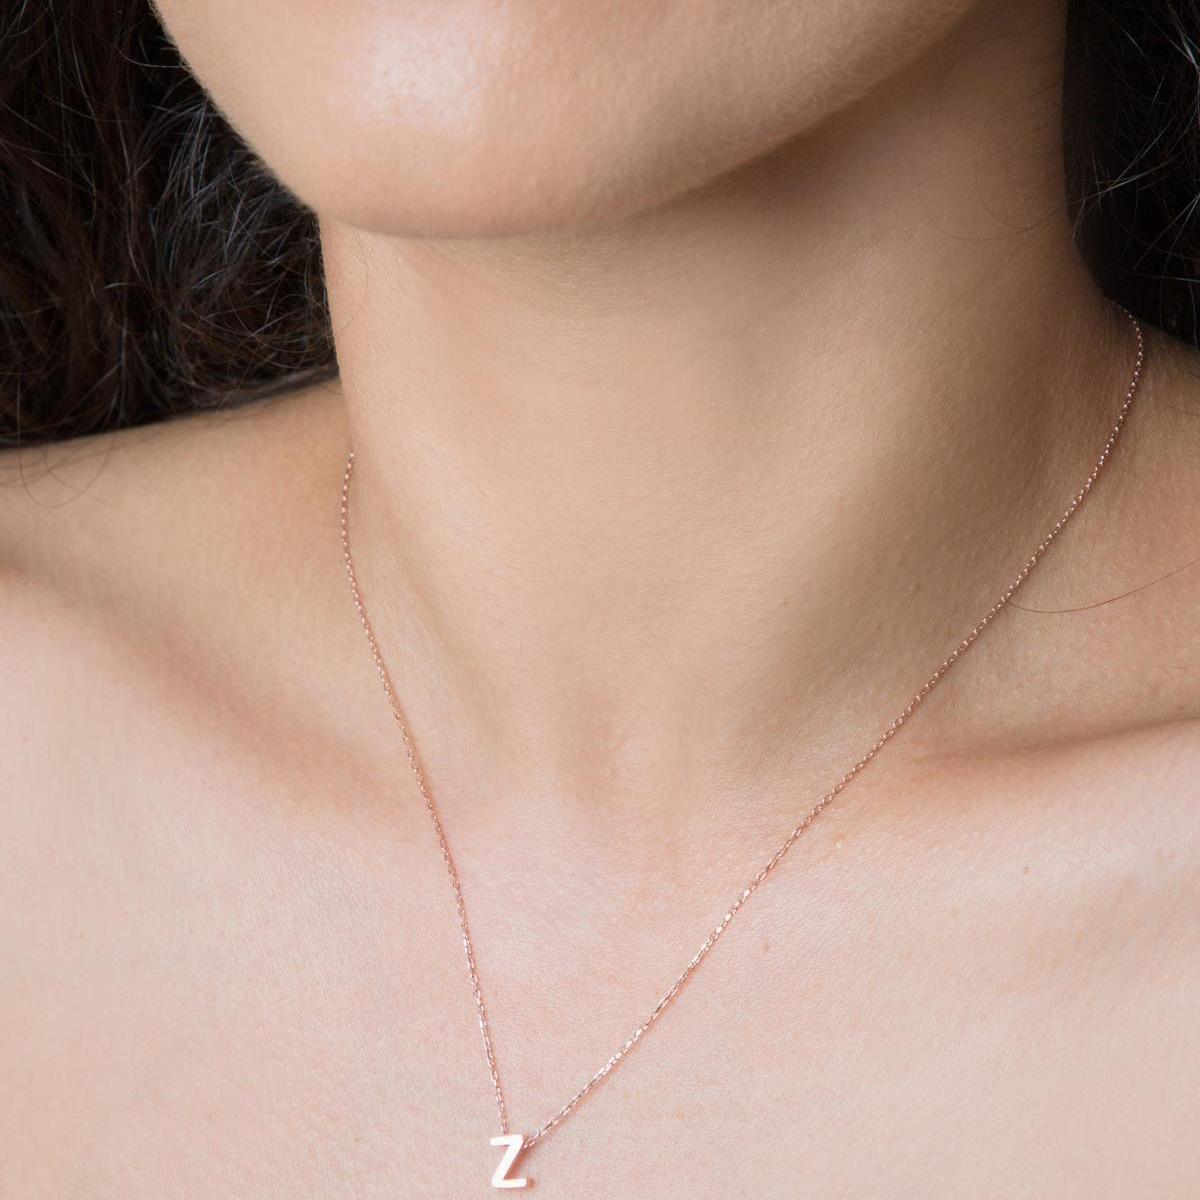 Z Initial Necklace Rose • Rose Gold Initial Necklace • Gift For Her - Trending Silver Gifts